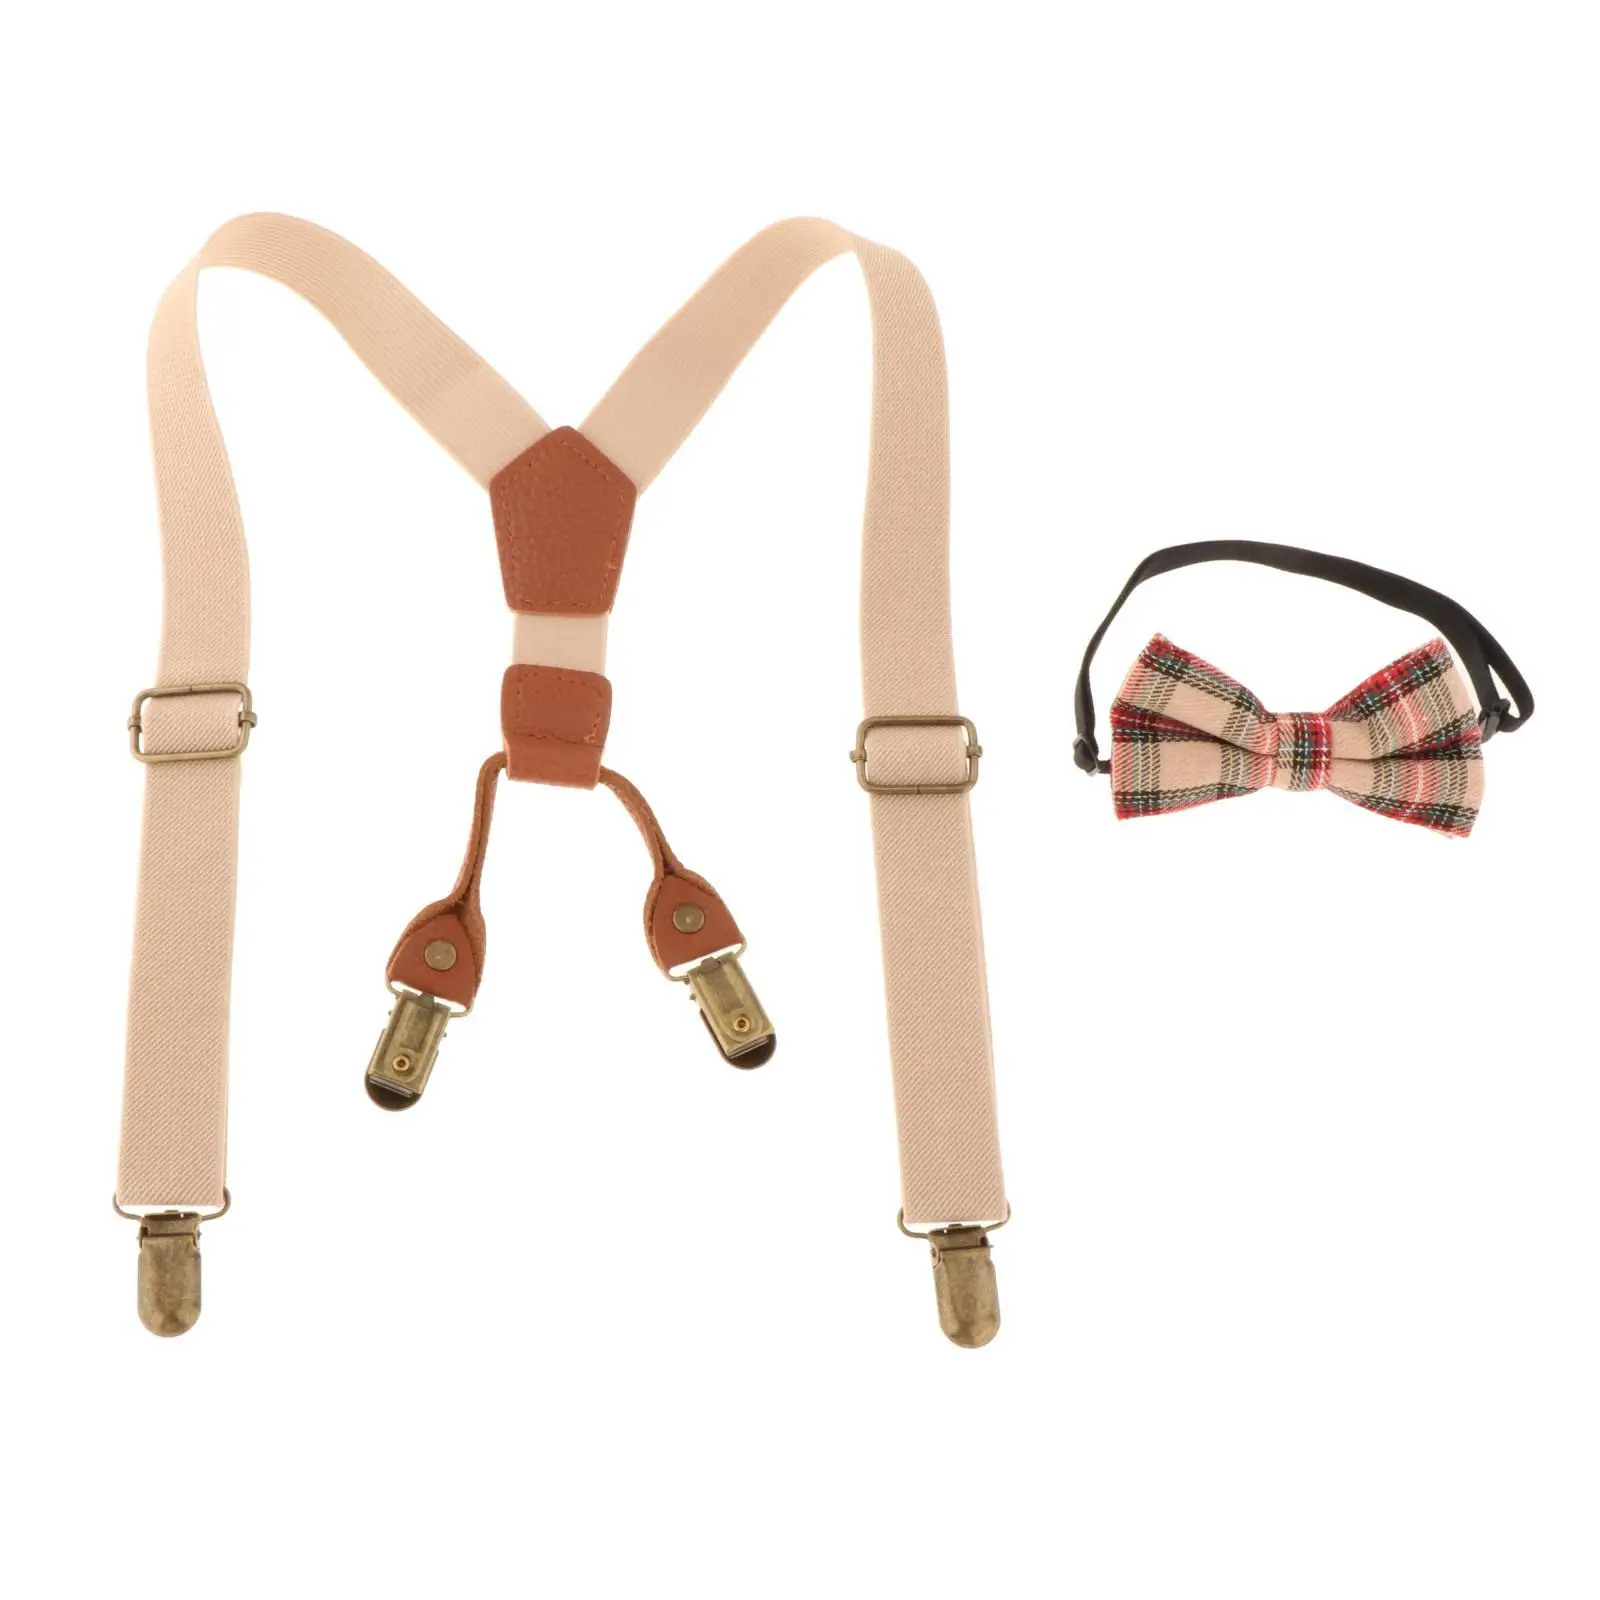 Kids Suspenders and Matching Bow Tie Set Y Back Construction Adjustable Elastic 4 Clips Braces for Boys Girls Toddlers Children